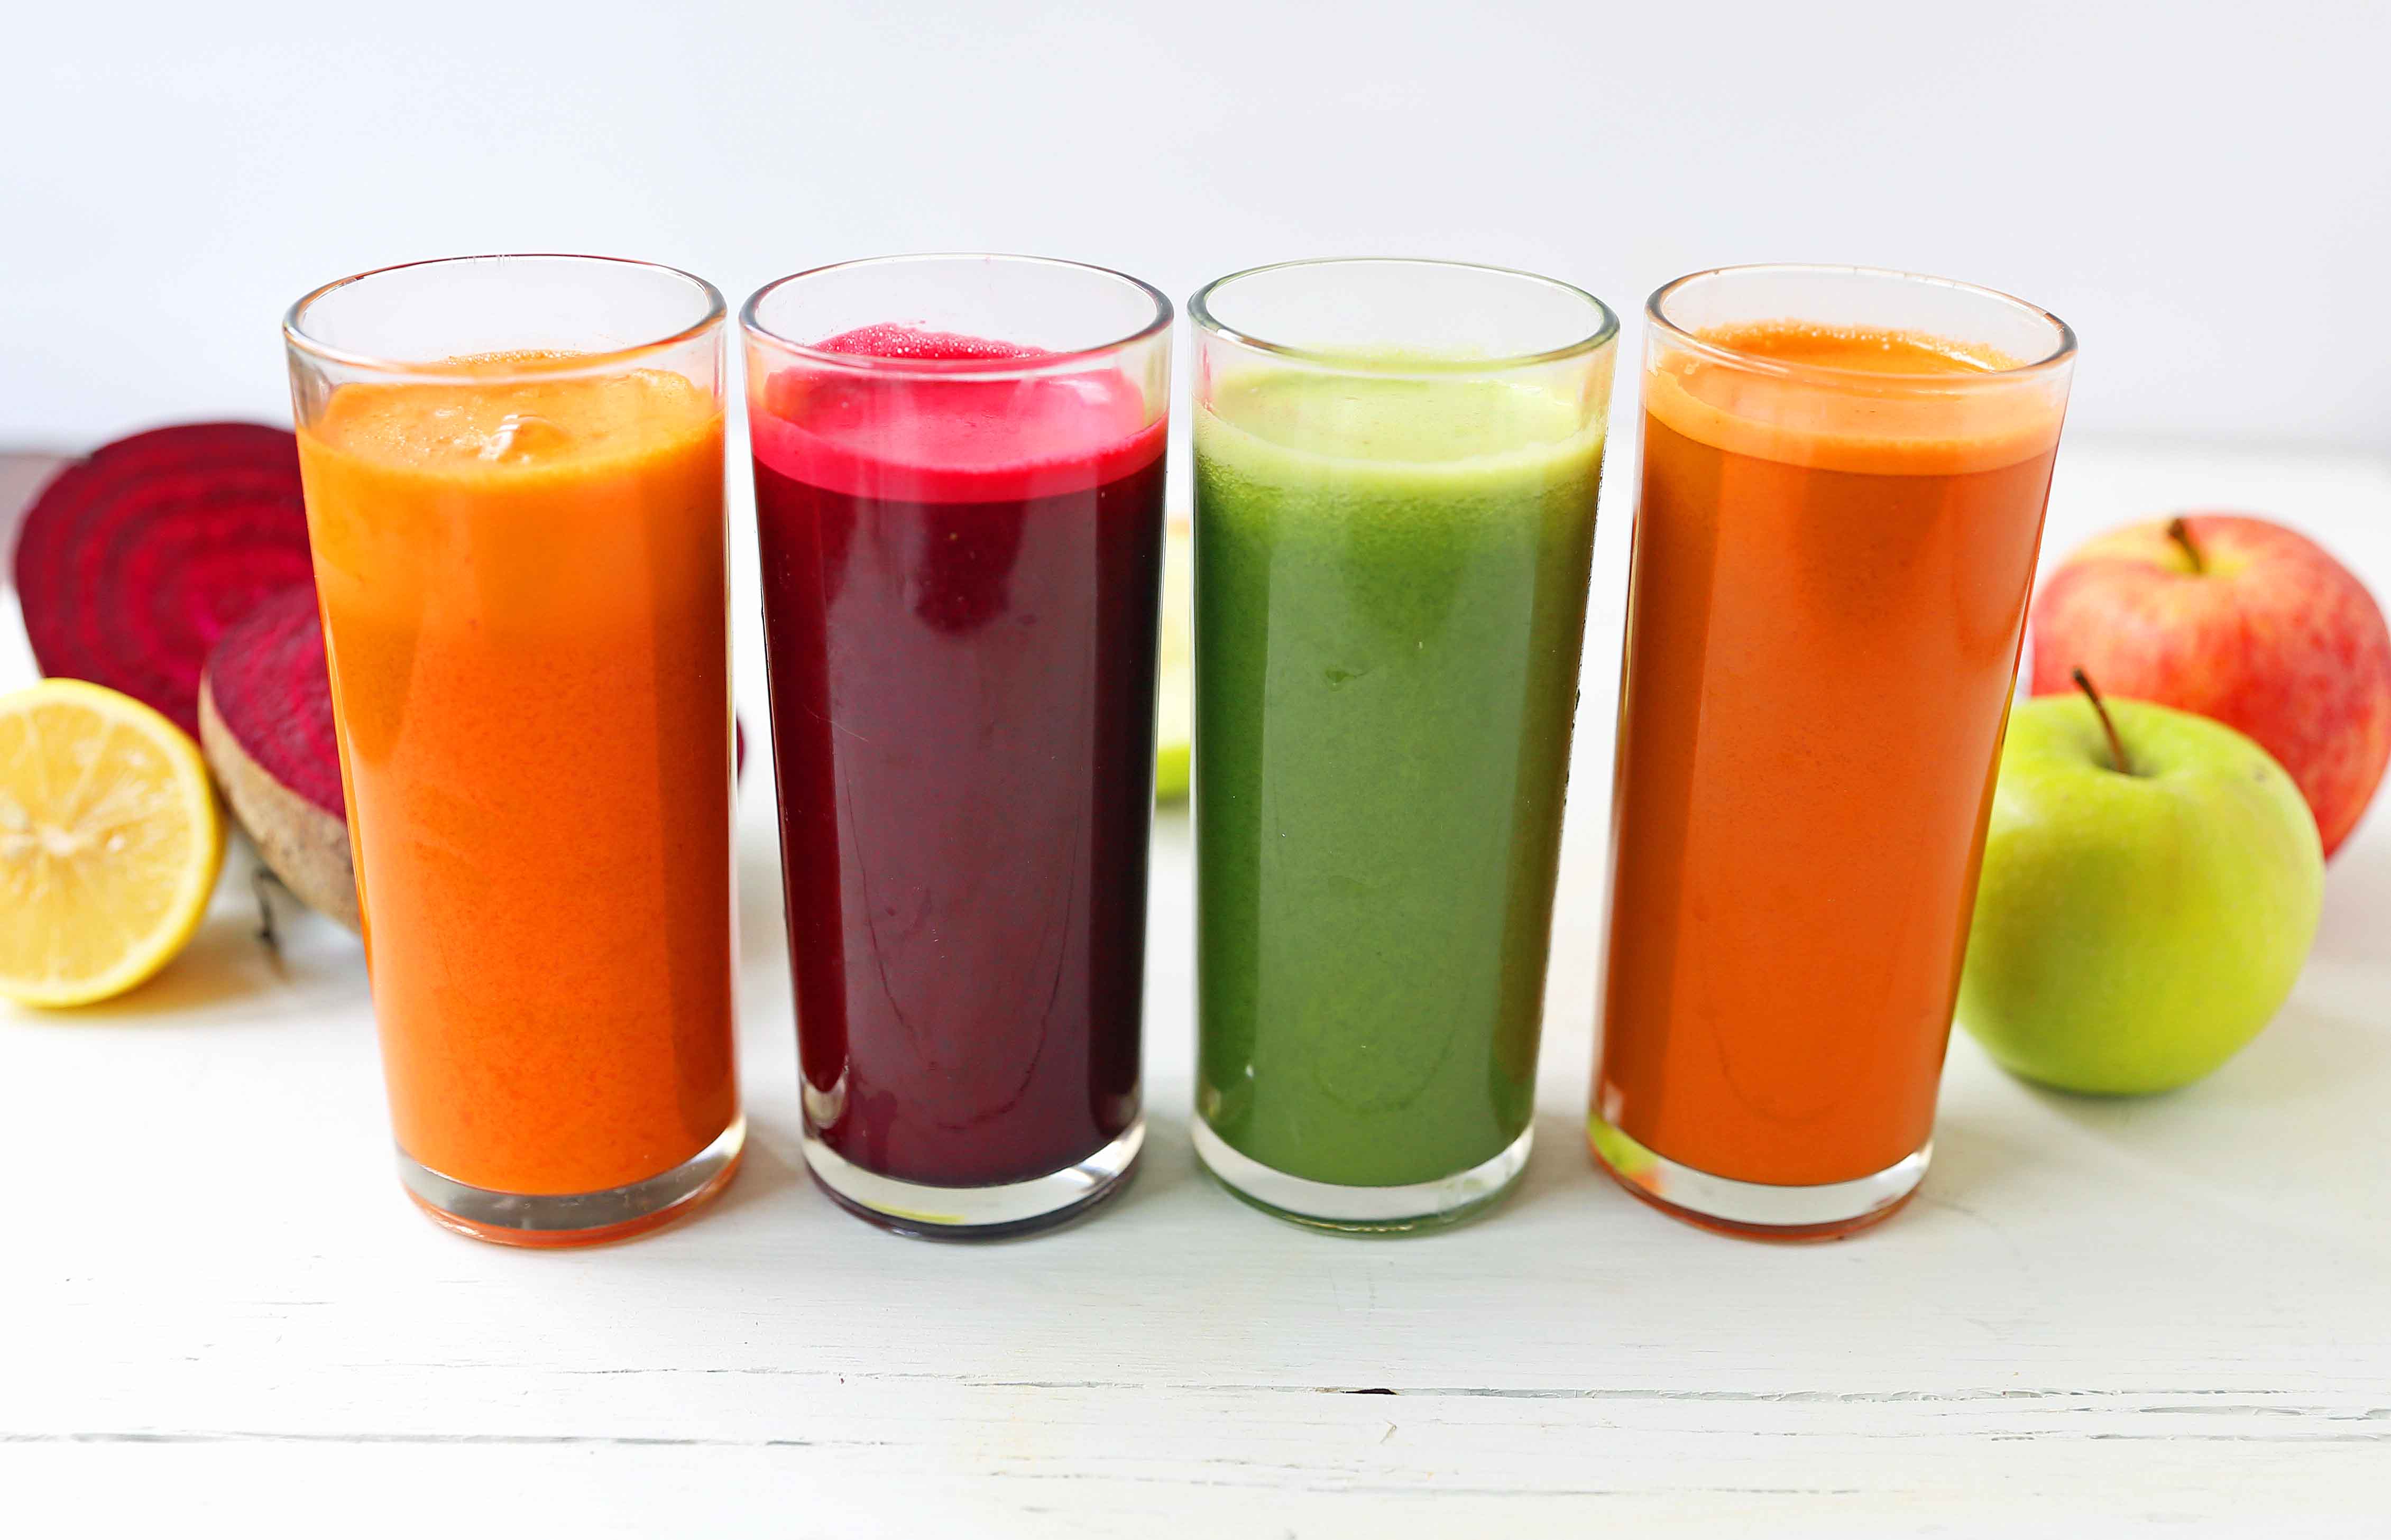 Some Juicing Recipes You Can Try With Fruits and Vegetables